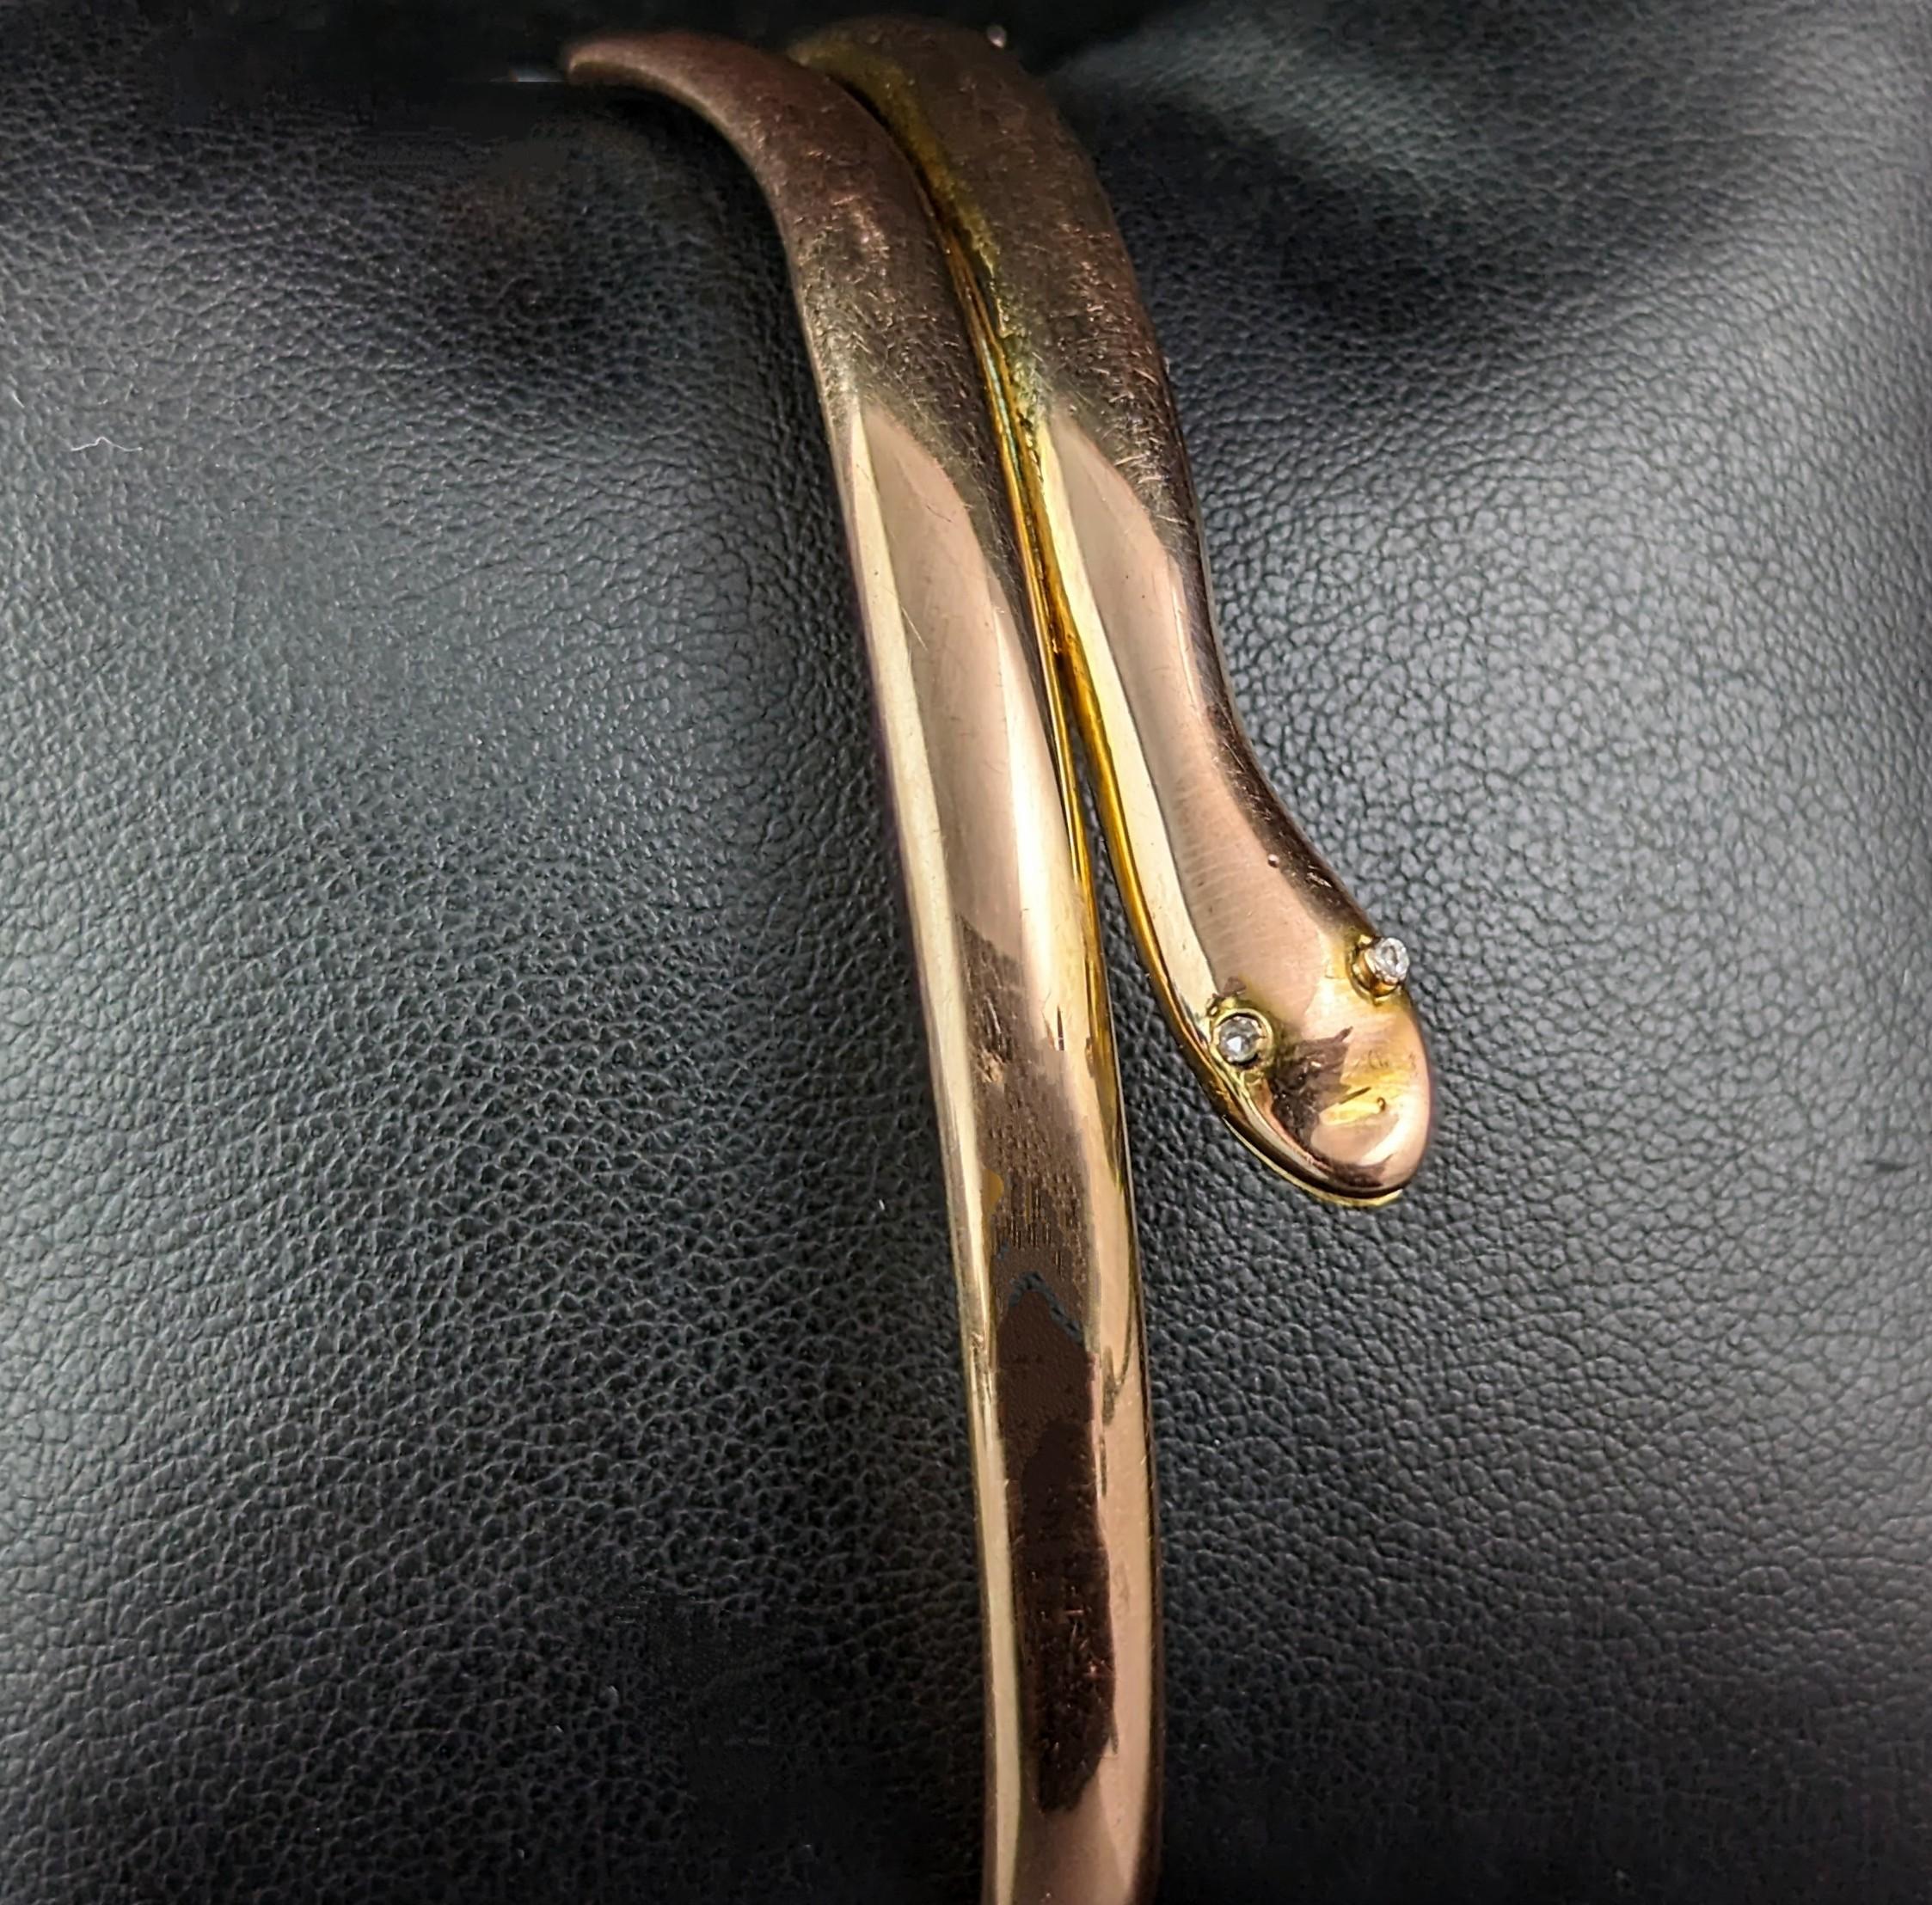 Whoever takes home this amazing antique 9ct gold snake bangle will not be disappointed!

This spectacular piece is a large size possibly to be worn as an upper arm bangle, designed to be worn higher up on the arm.

The Art Deco Egyptian revival